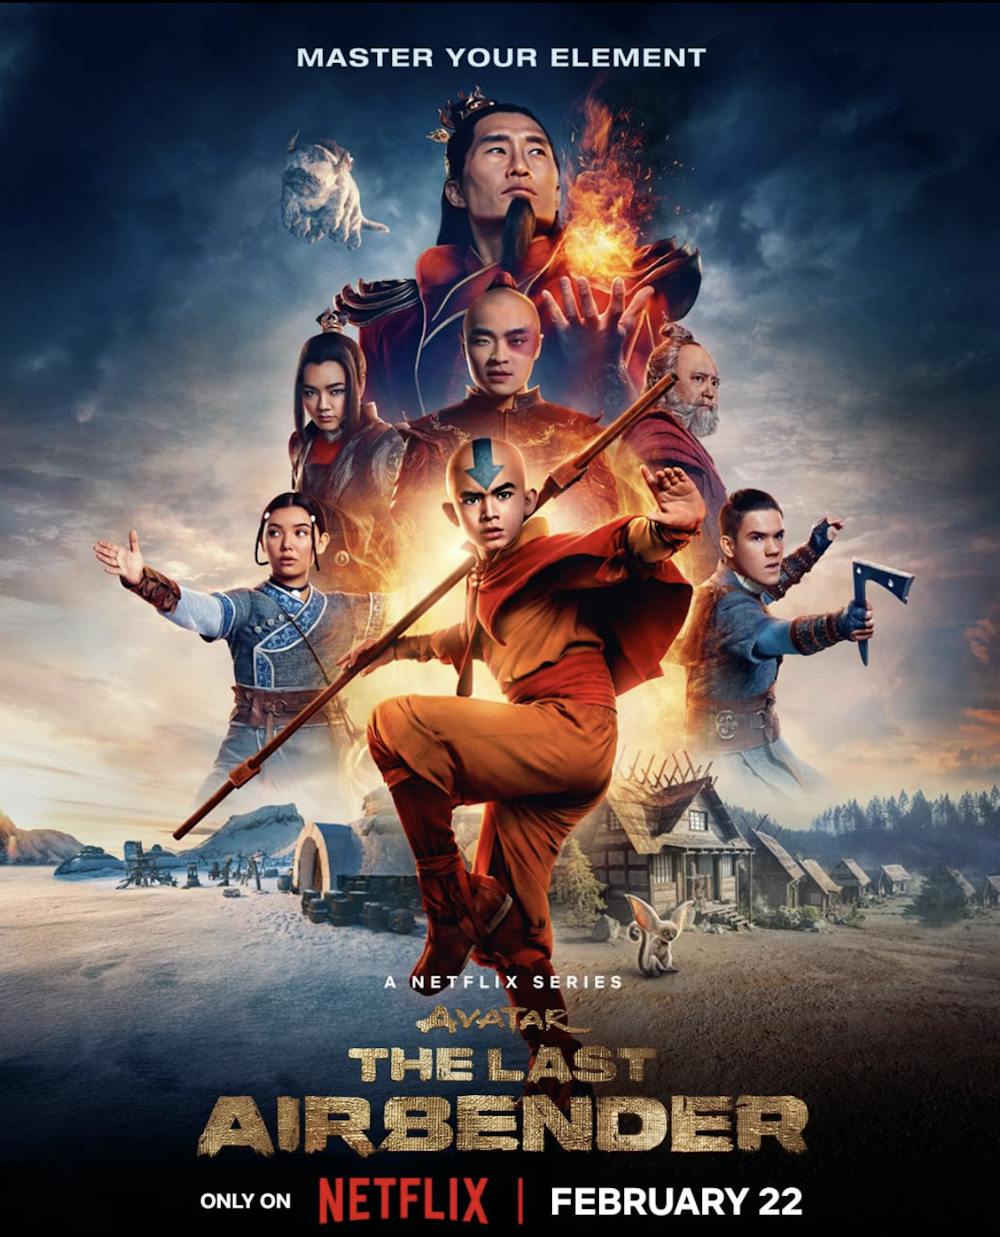 <p><em>Season one of “Avatar: The Last Airbender” (2024) garnered massive polarization, with praise for its visuals but criticism for deviations from the specific animated characters&#x27; depth (Photo courtesy of </em><a href="https://www.imdb.com/title/tt9018736/" target=""><em>IMDb</em></a><em>). <br/></em></p>